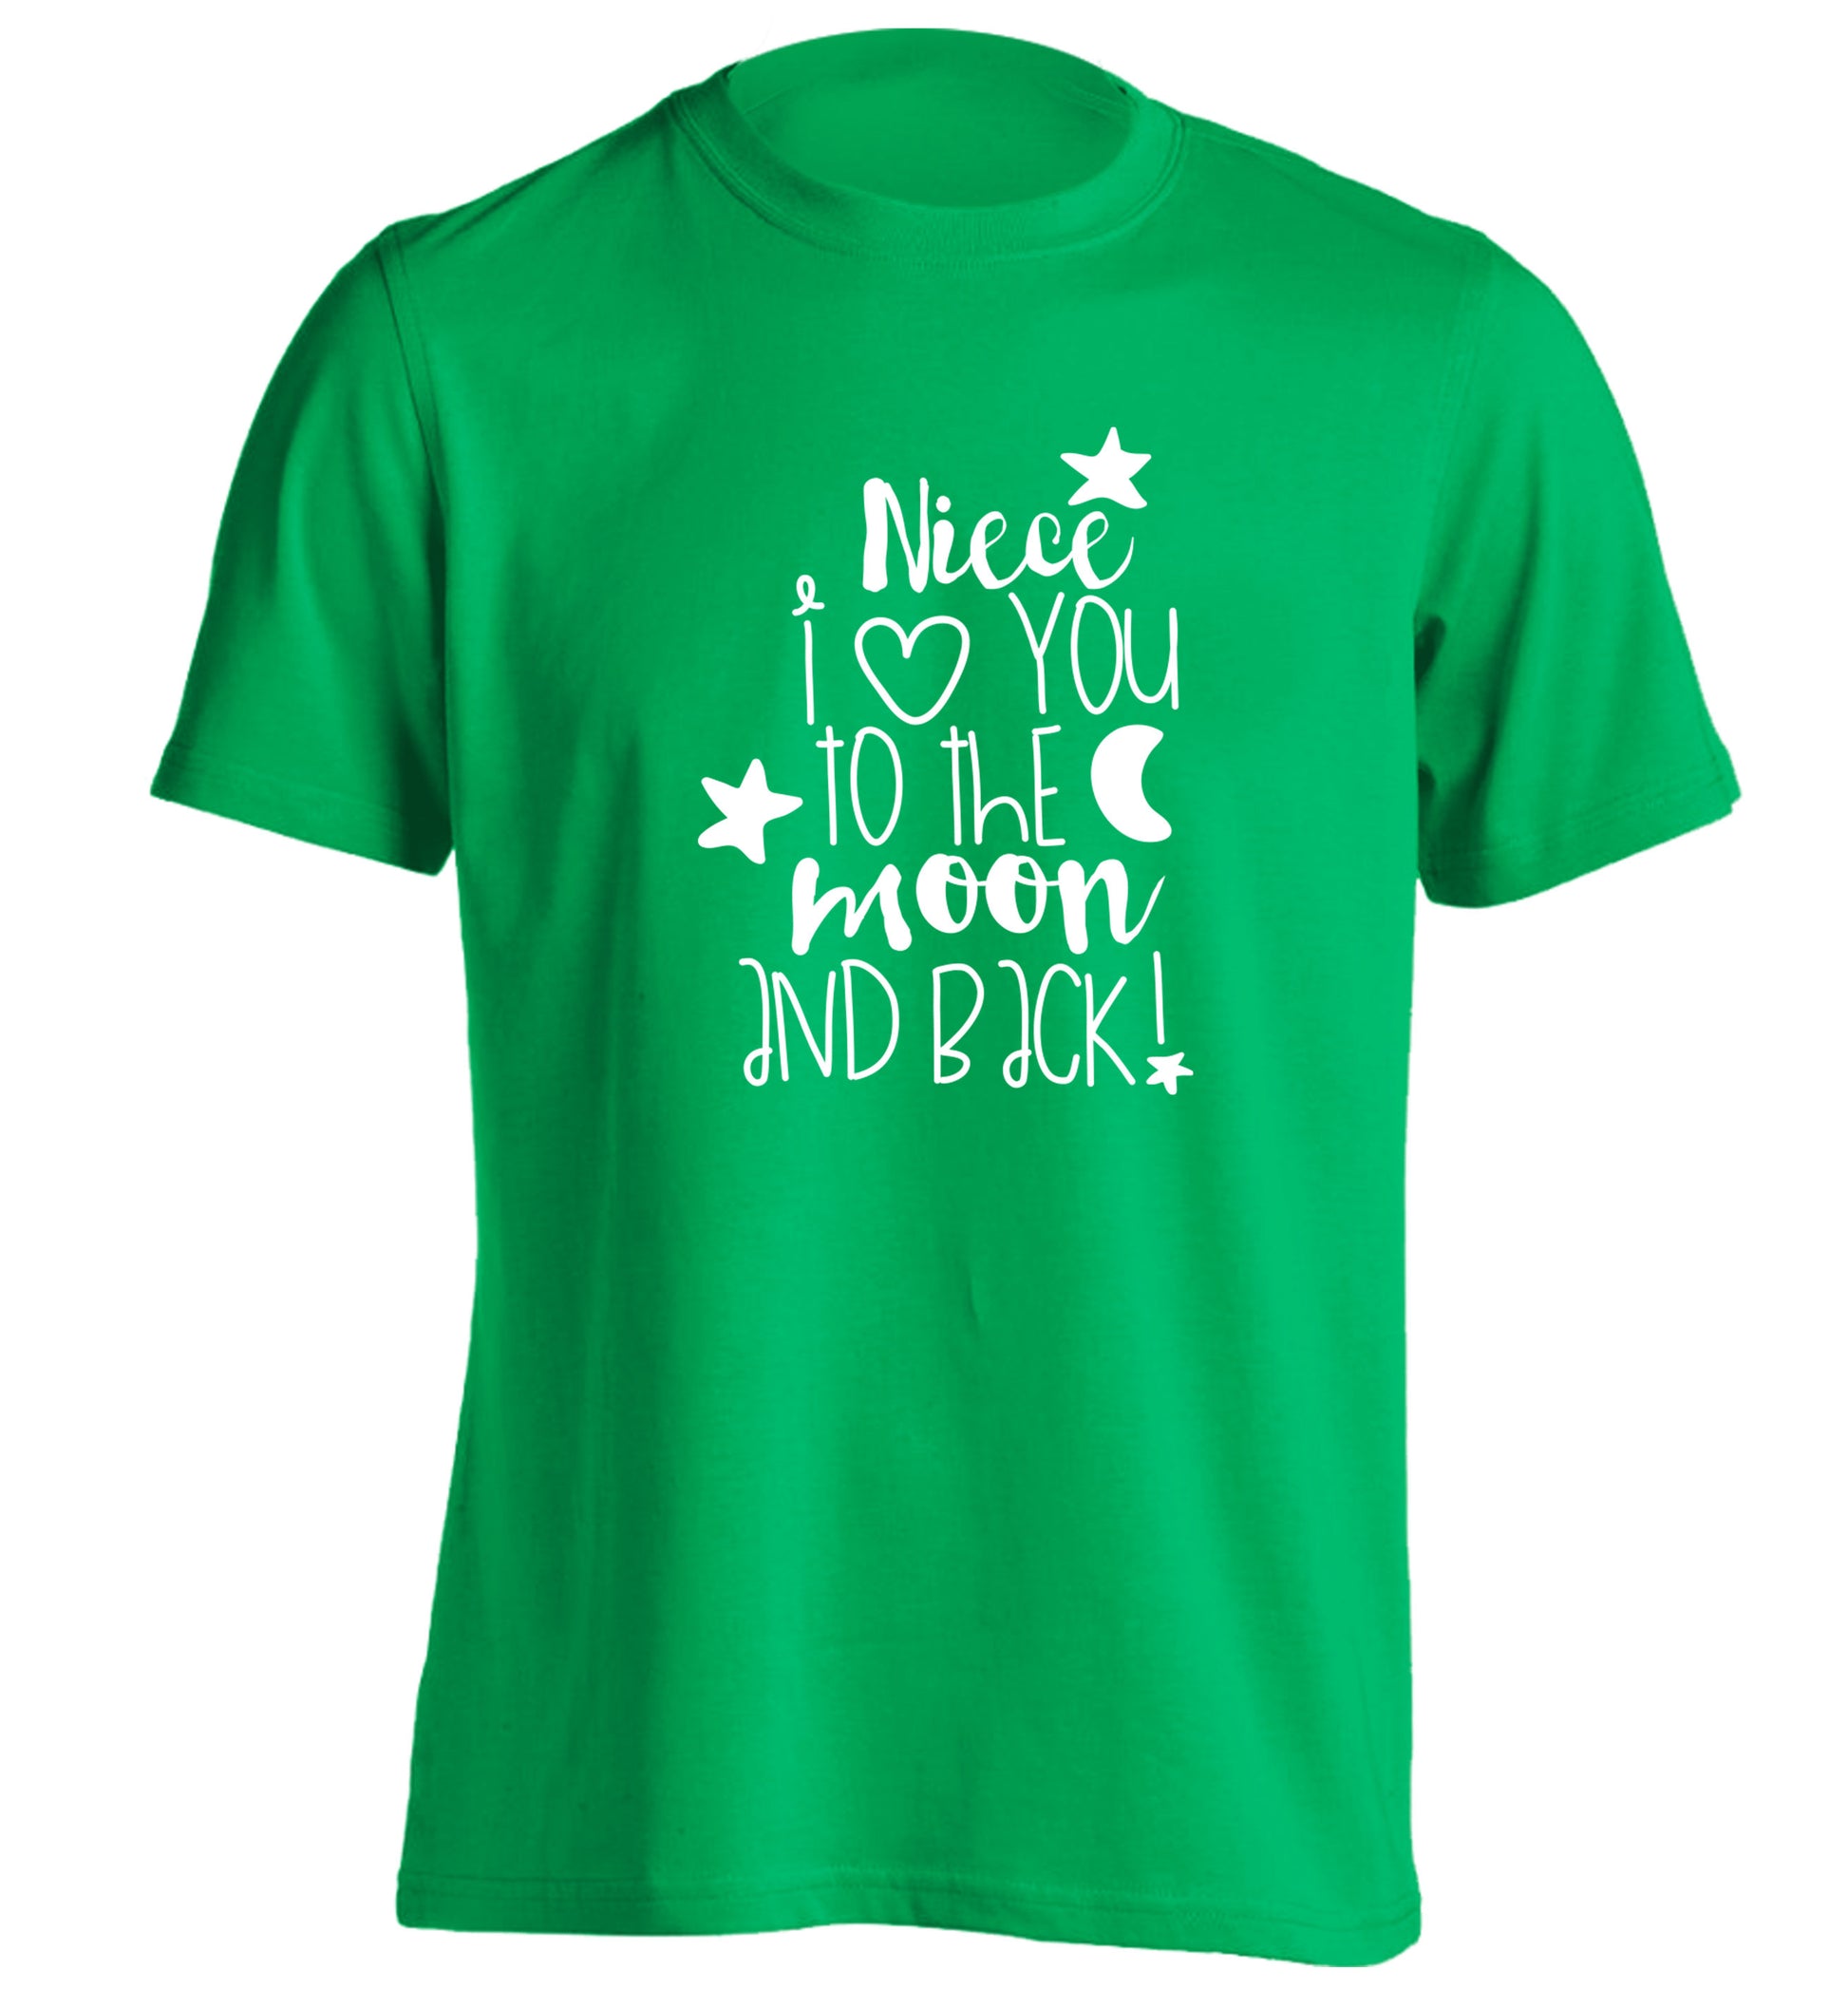 Niece I love you to the moon and back adults unisex green Tshirt 2XL